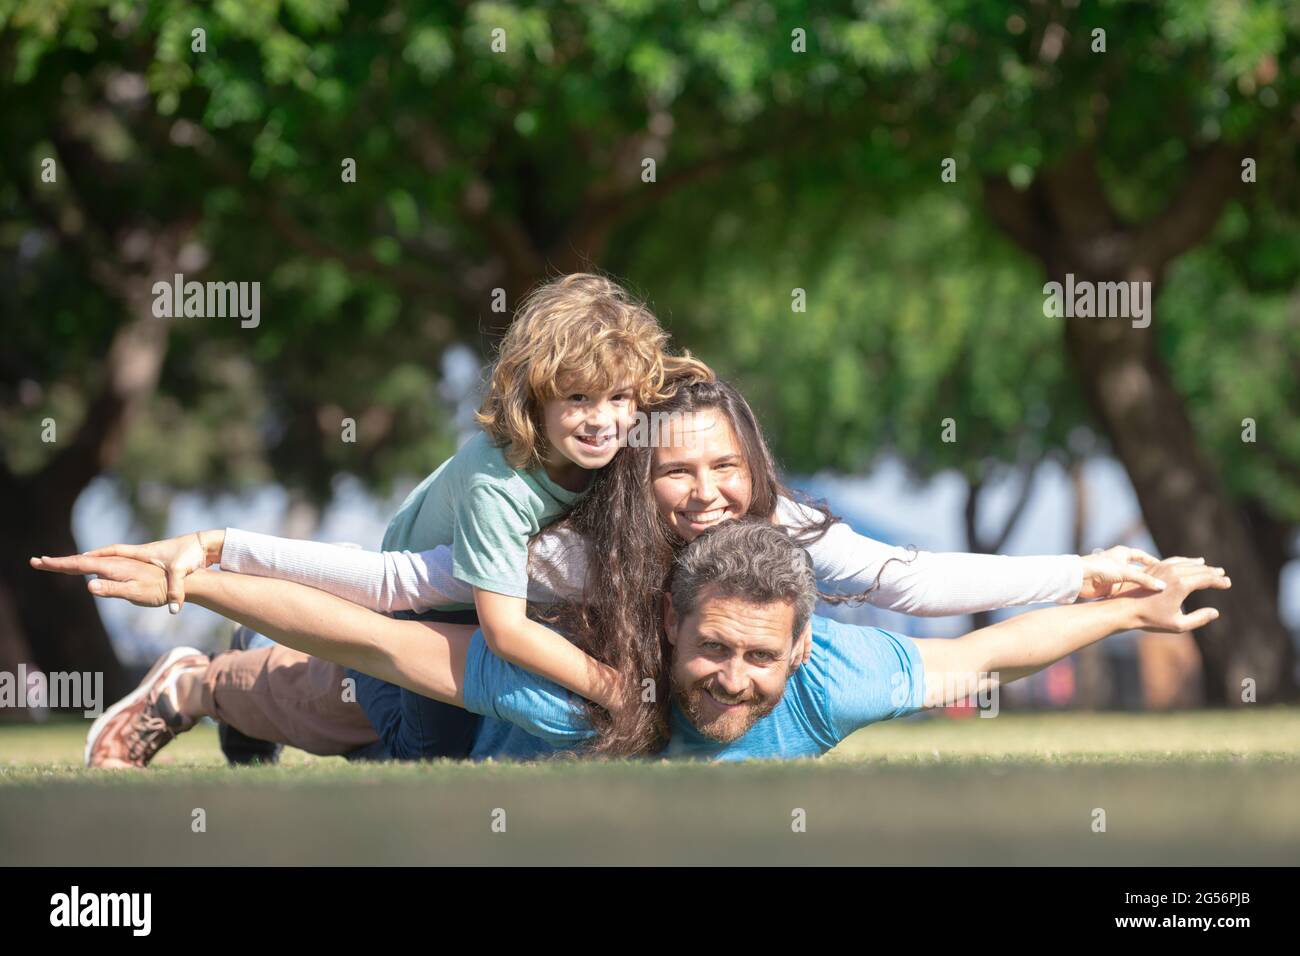 Mother father and child son hugging and embracing outdoors at summer park. Fly concept, little boy is sitting pickaback while imitating the flight. Stock Photo